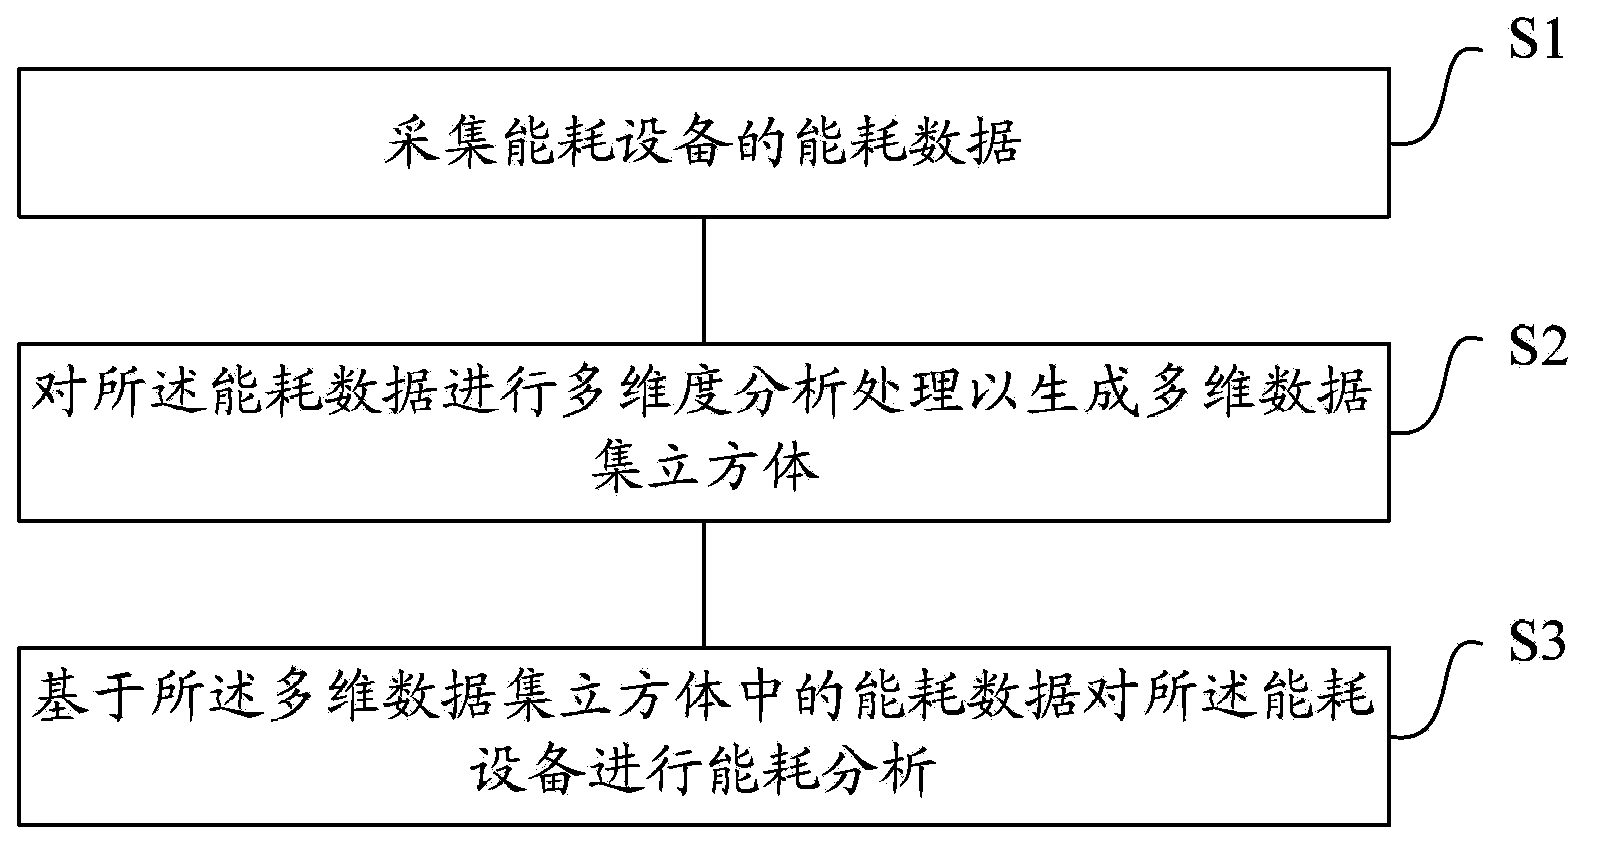 Energy consumption monitoring method and energy consumption monitoring system